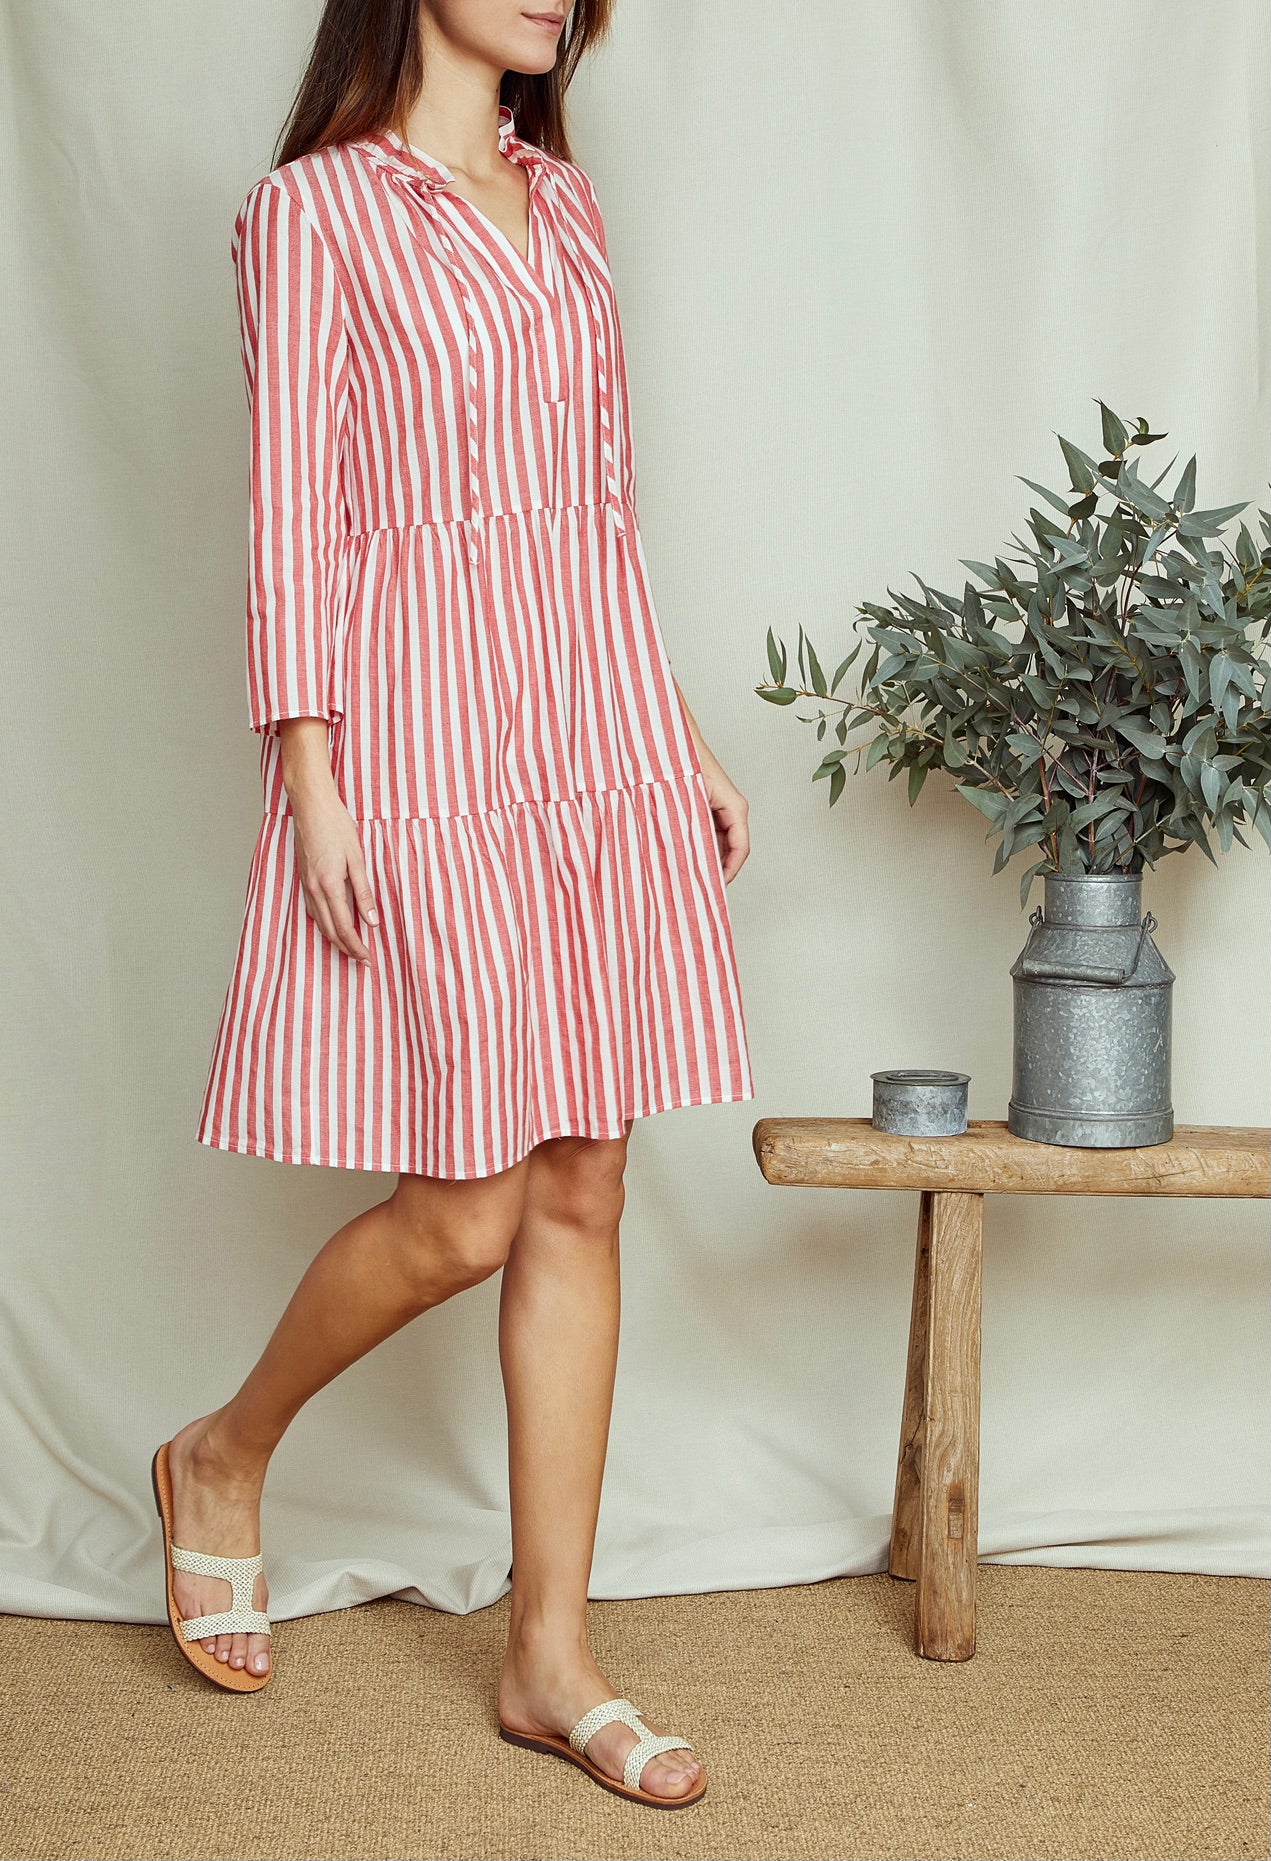 Striped Midi Dress in Red and White Hues